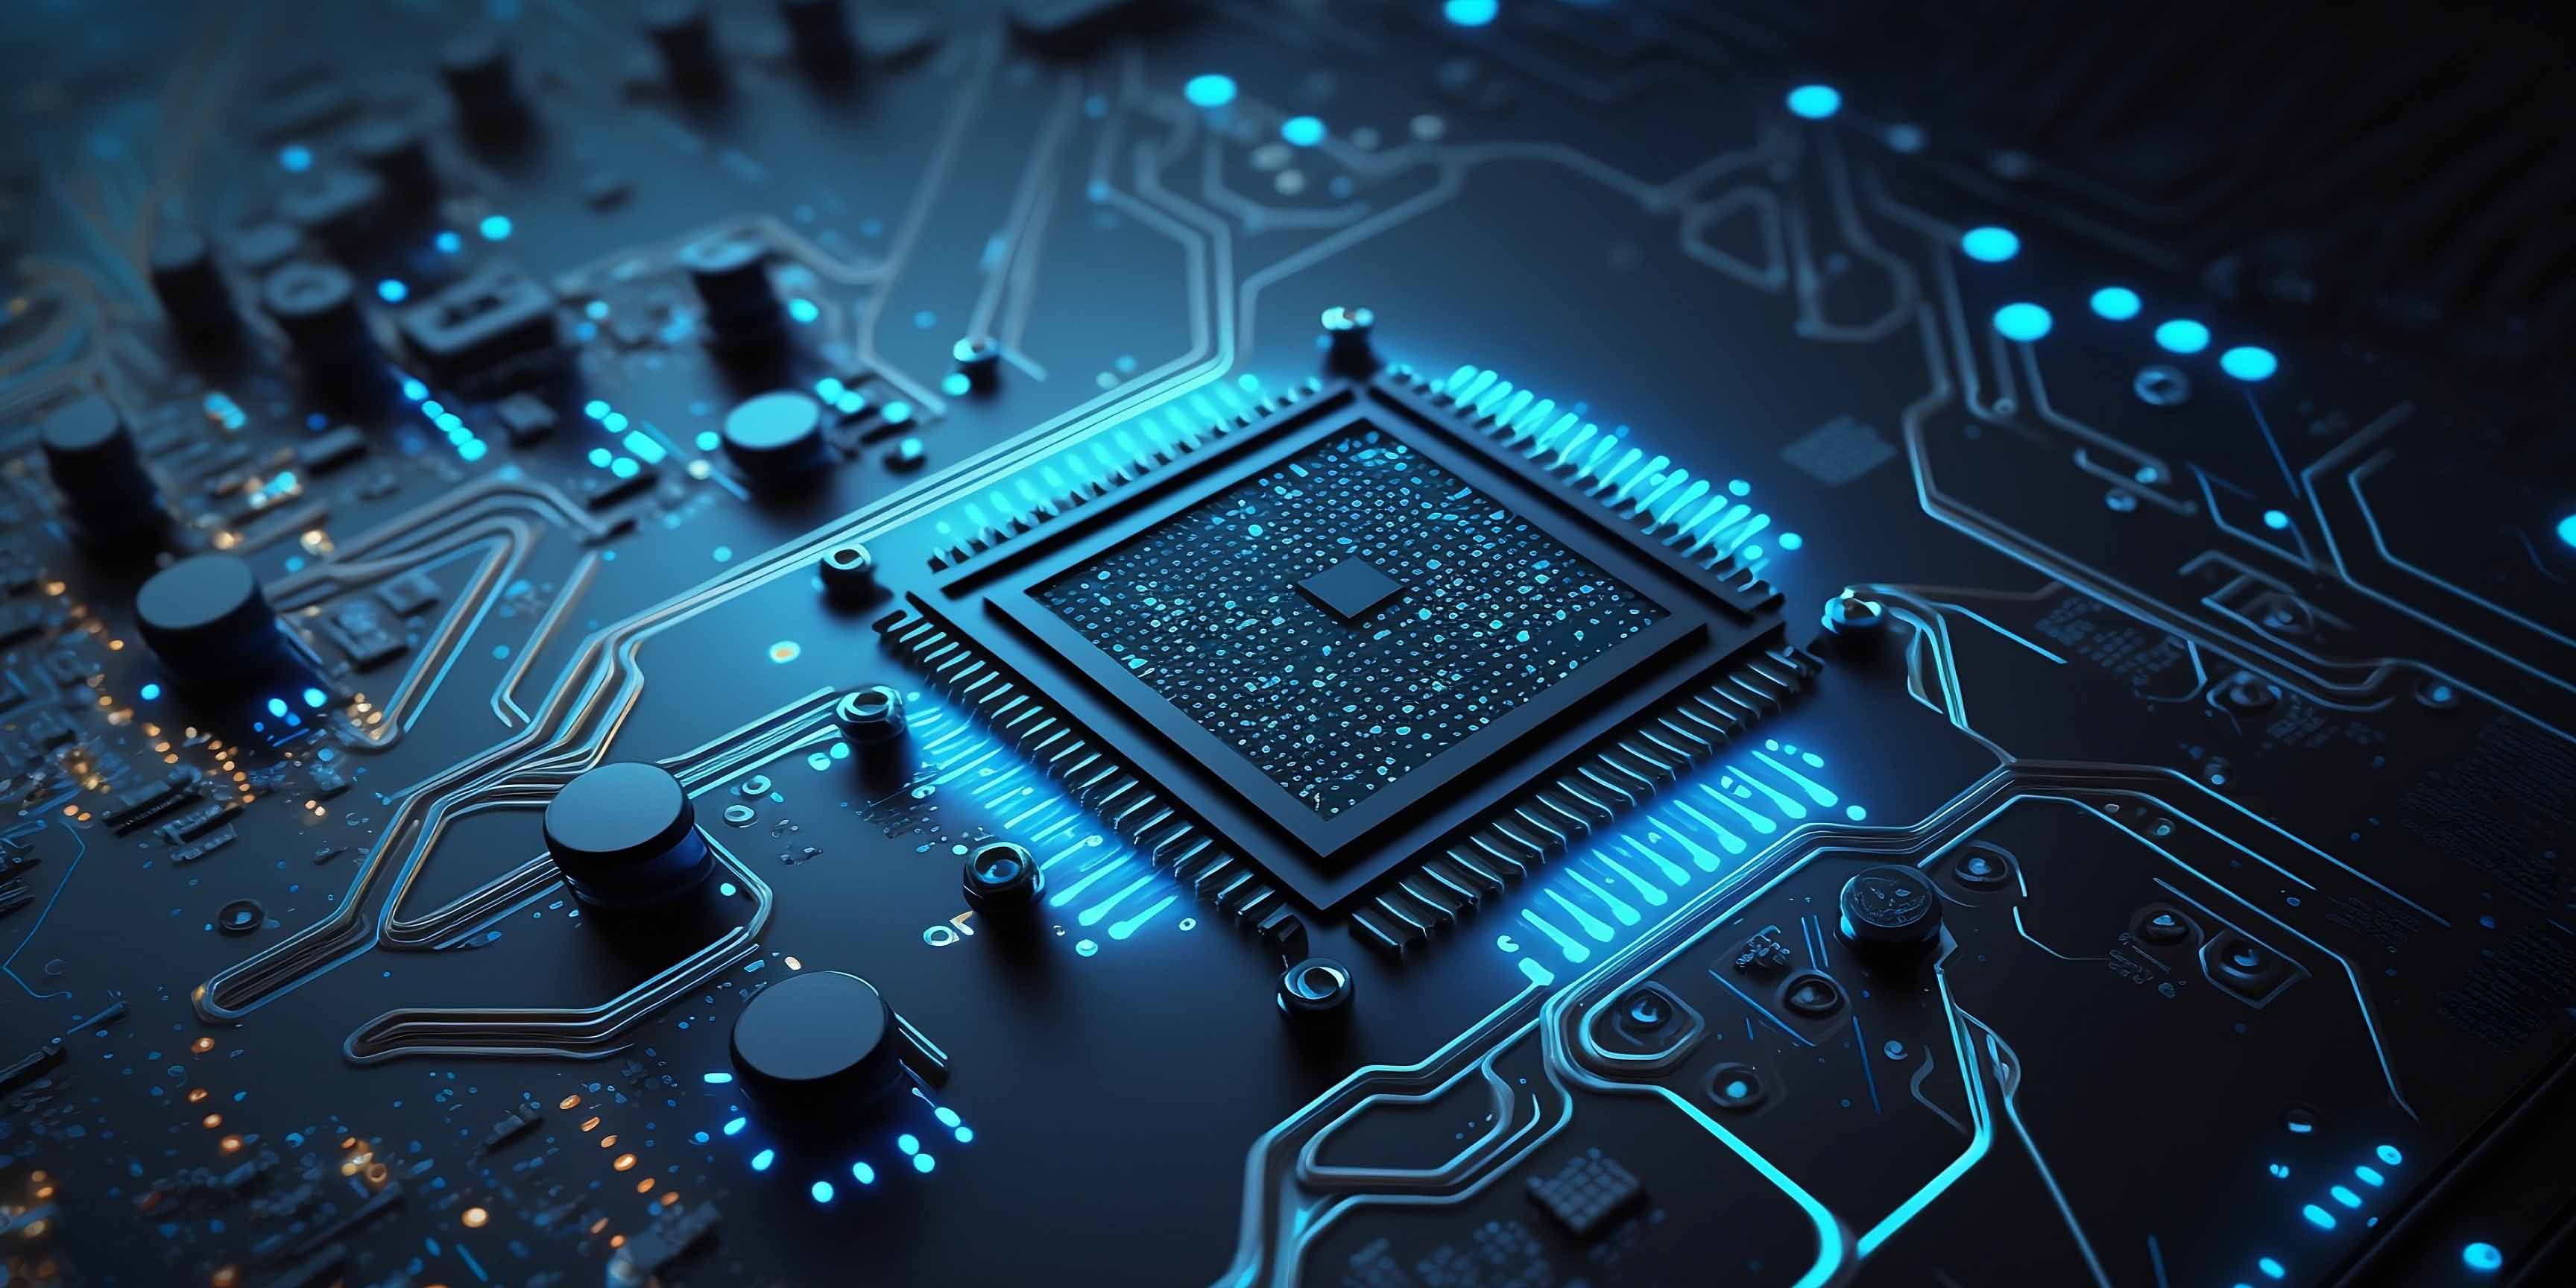 Close-up image of a computer processor chip on a circuit board with blue glowing lights and connections.